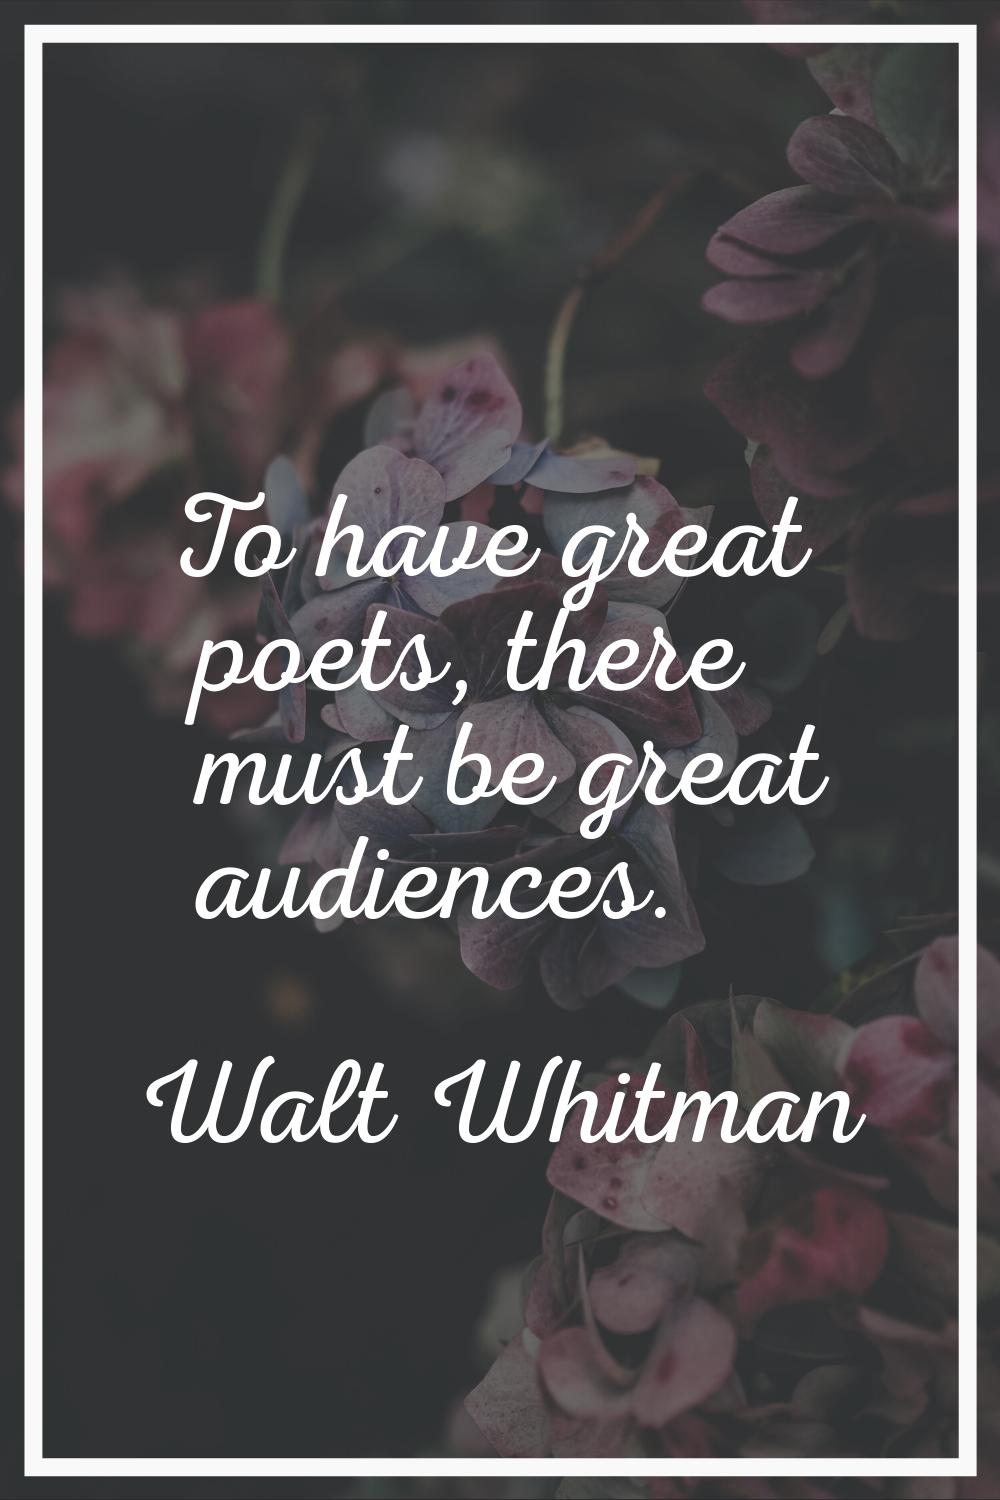 To have great poets, there must be great audiences.